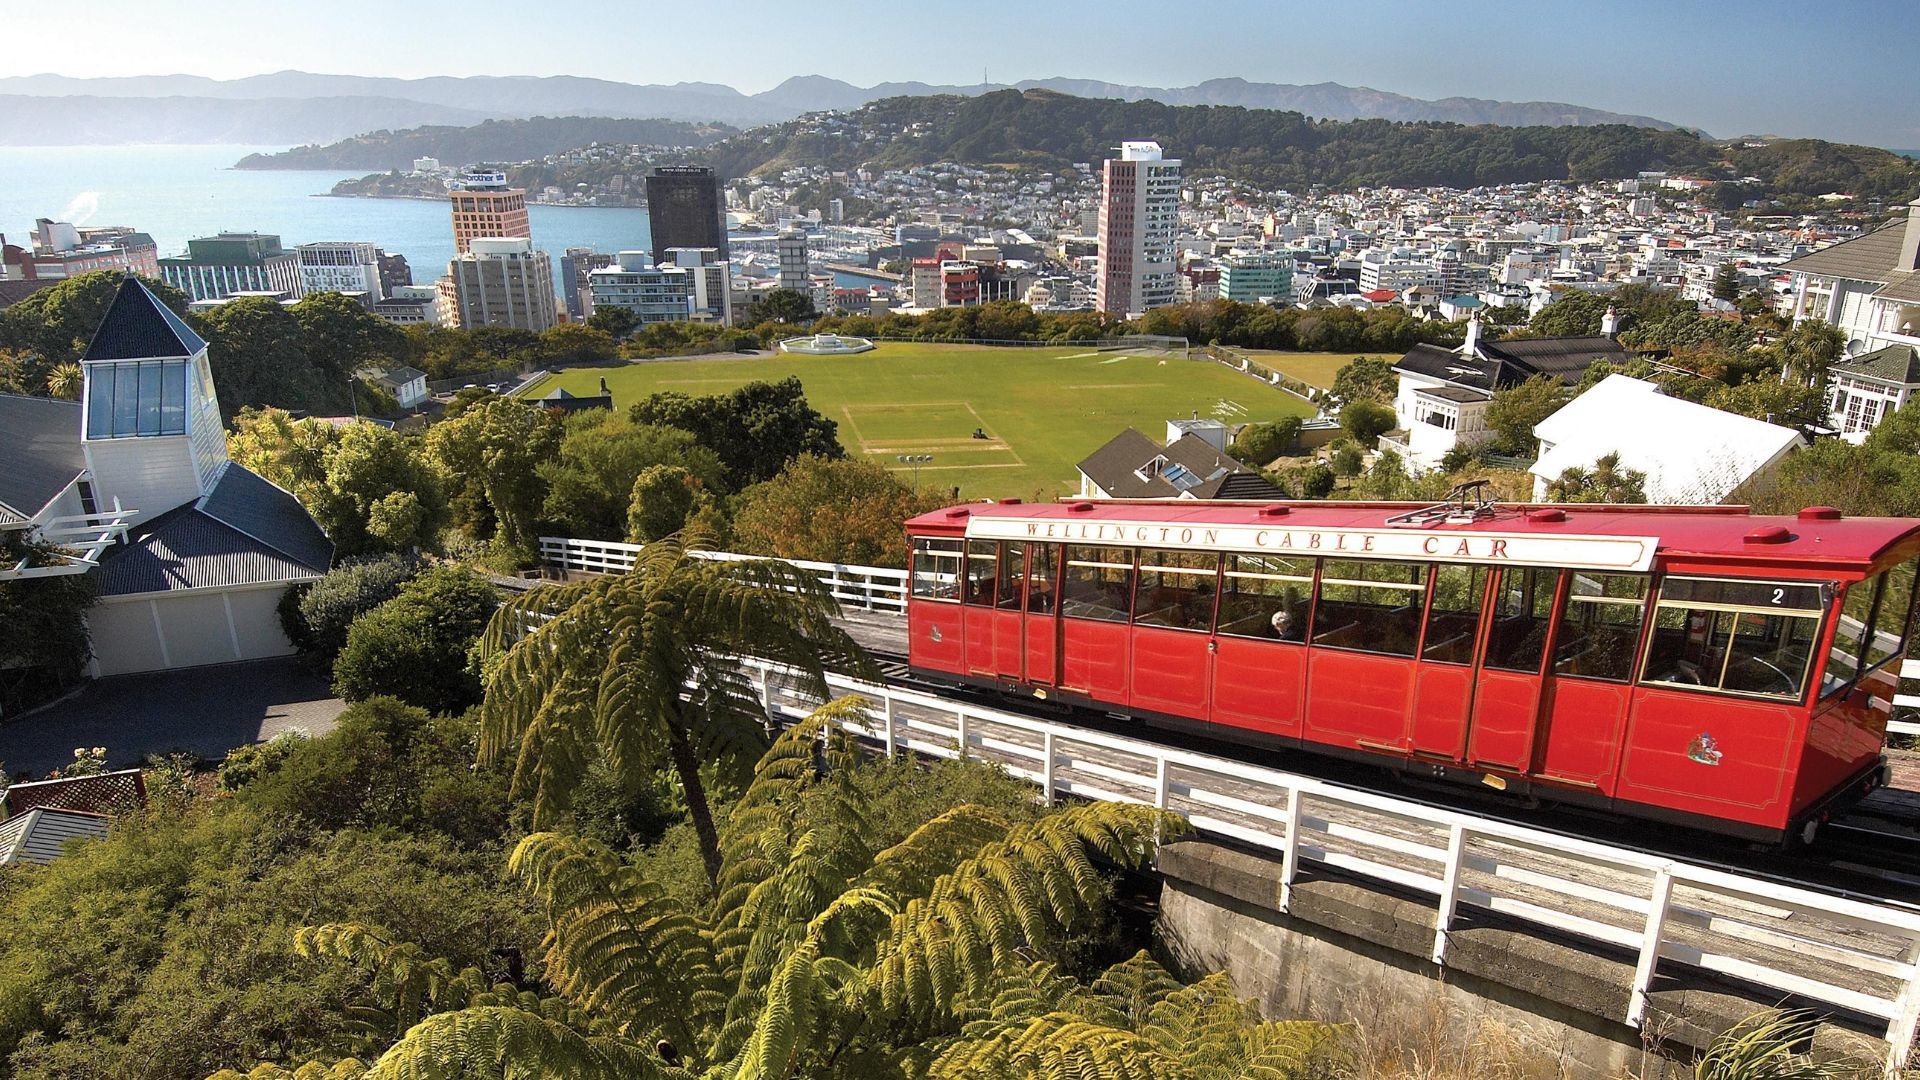 A Red Train On A Track With Wellington Cable Car In The Background